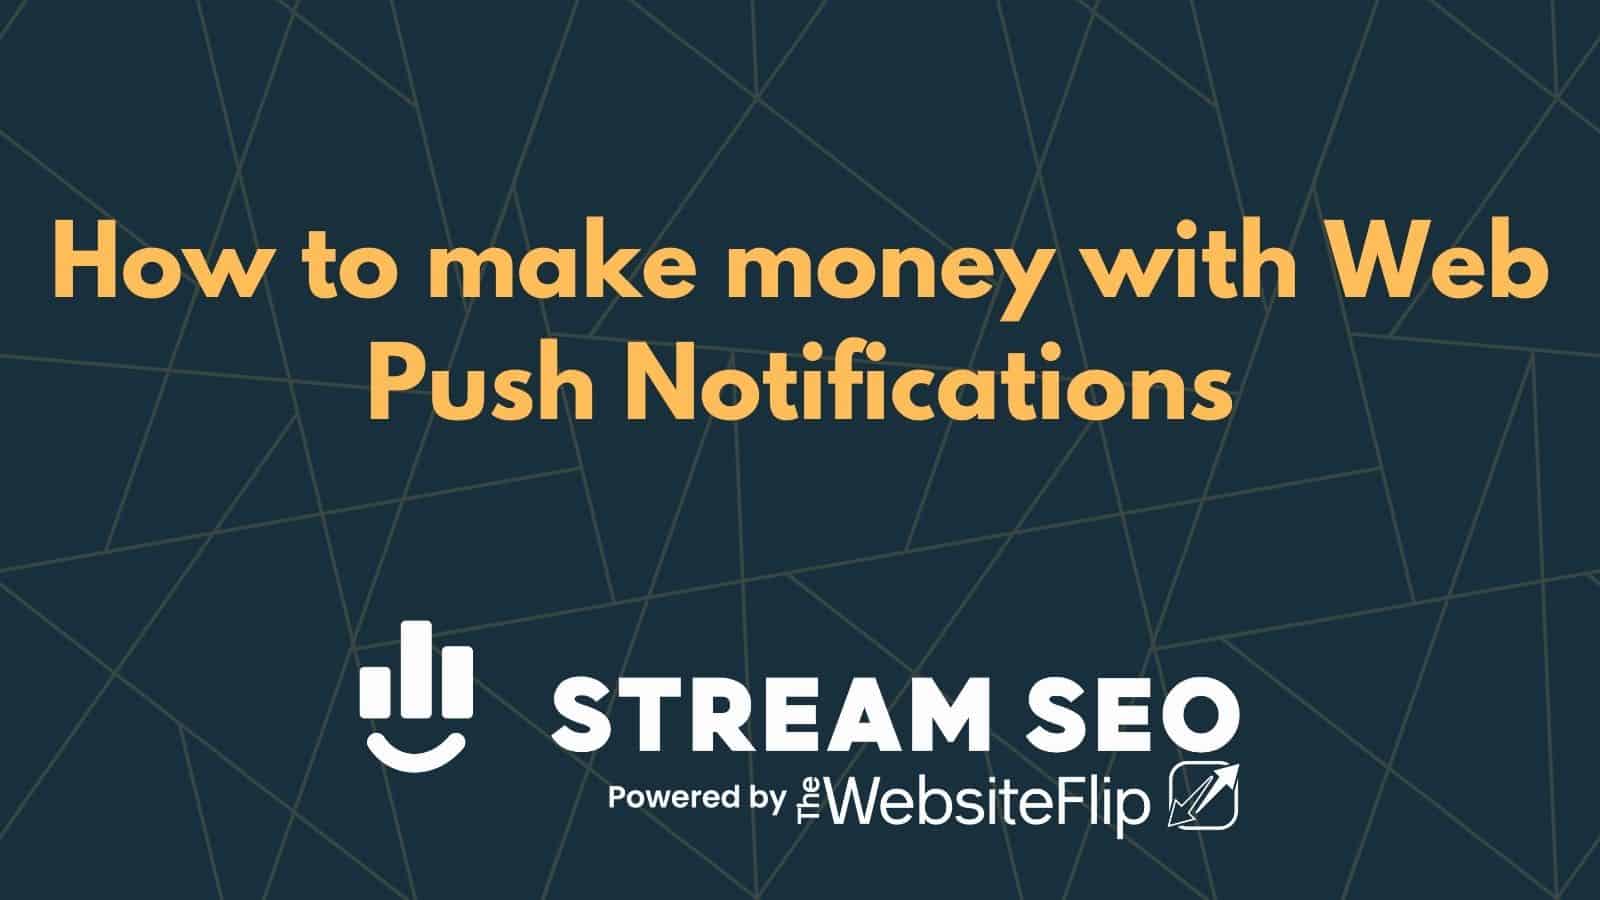 How to make money with Web Push Notifications